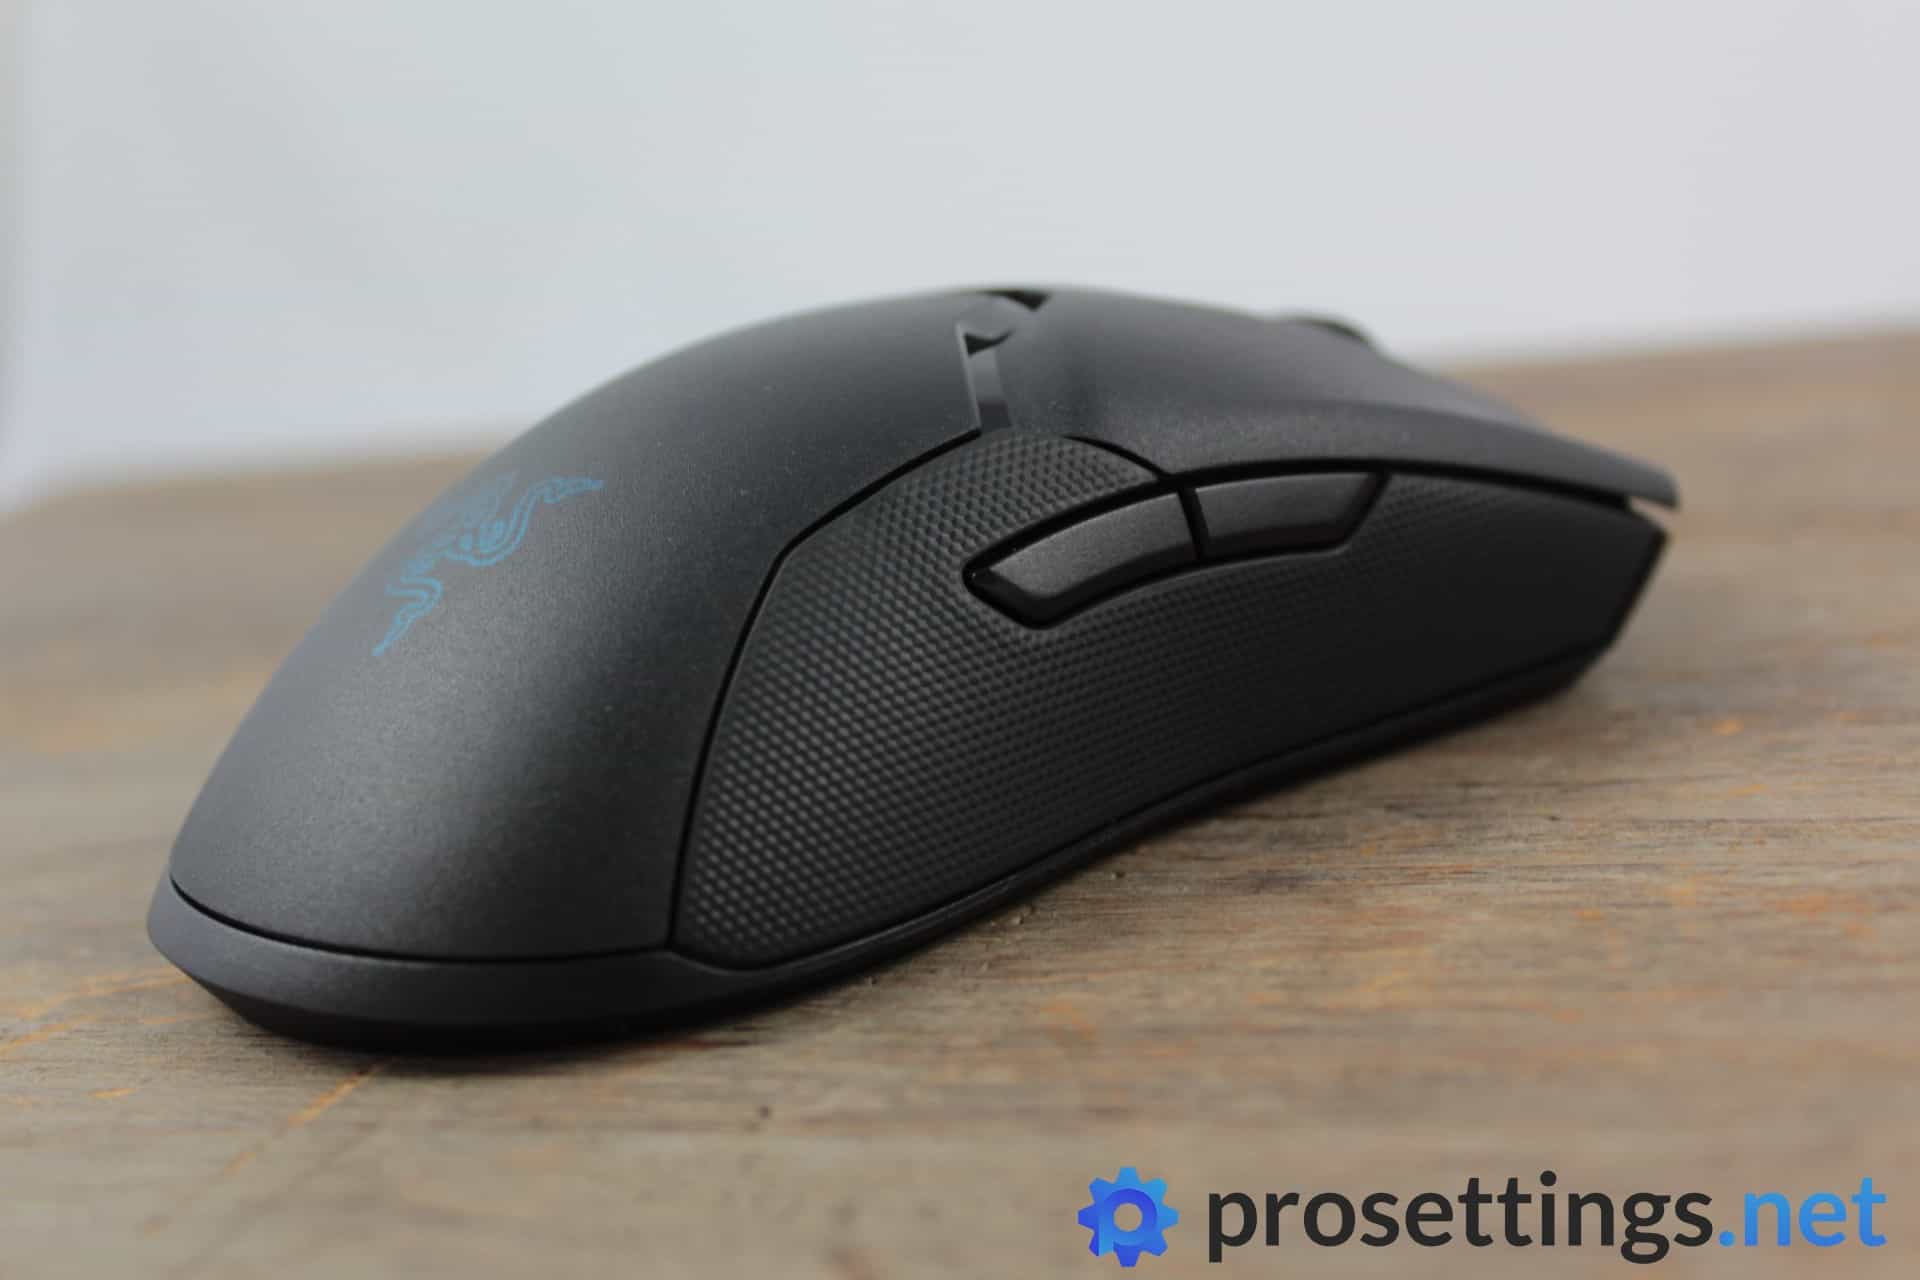 Razer Viper Ultimate Review Mouse